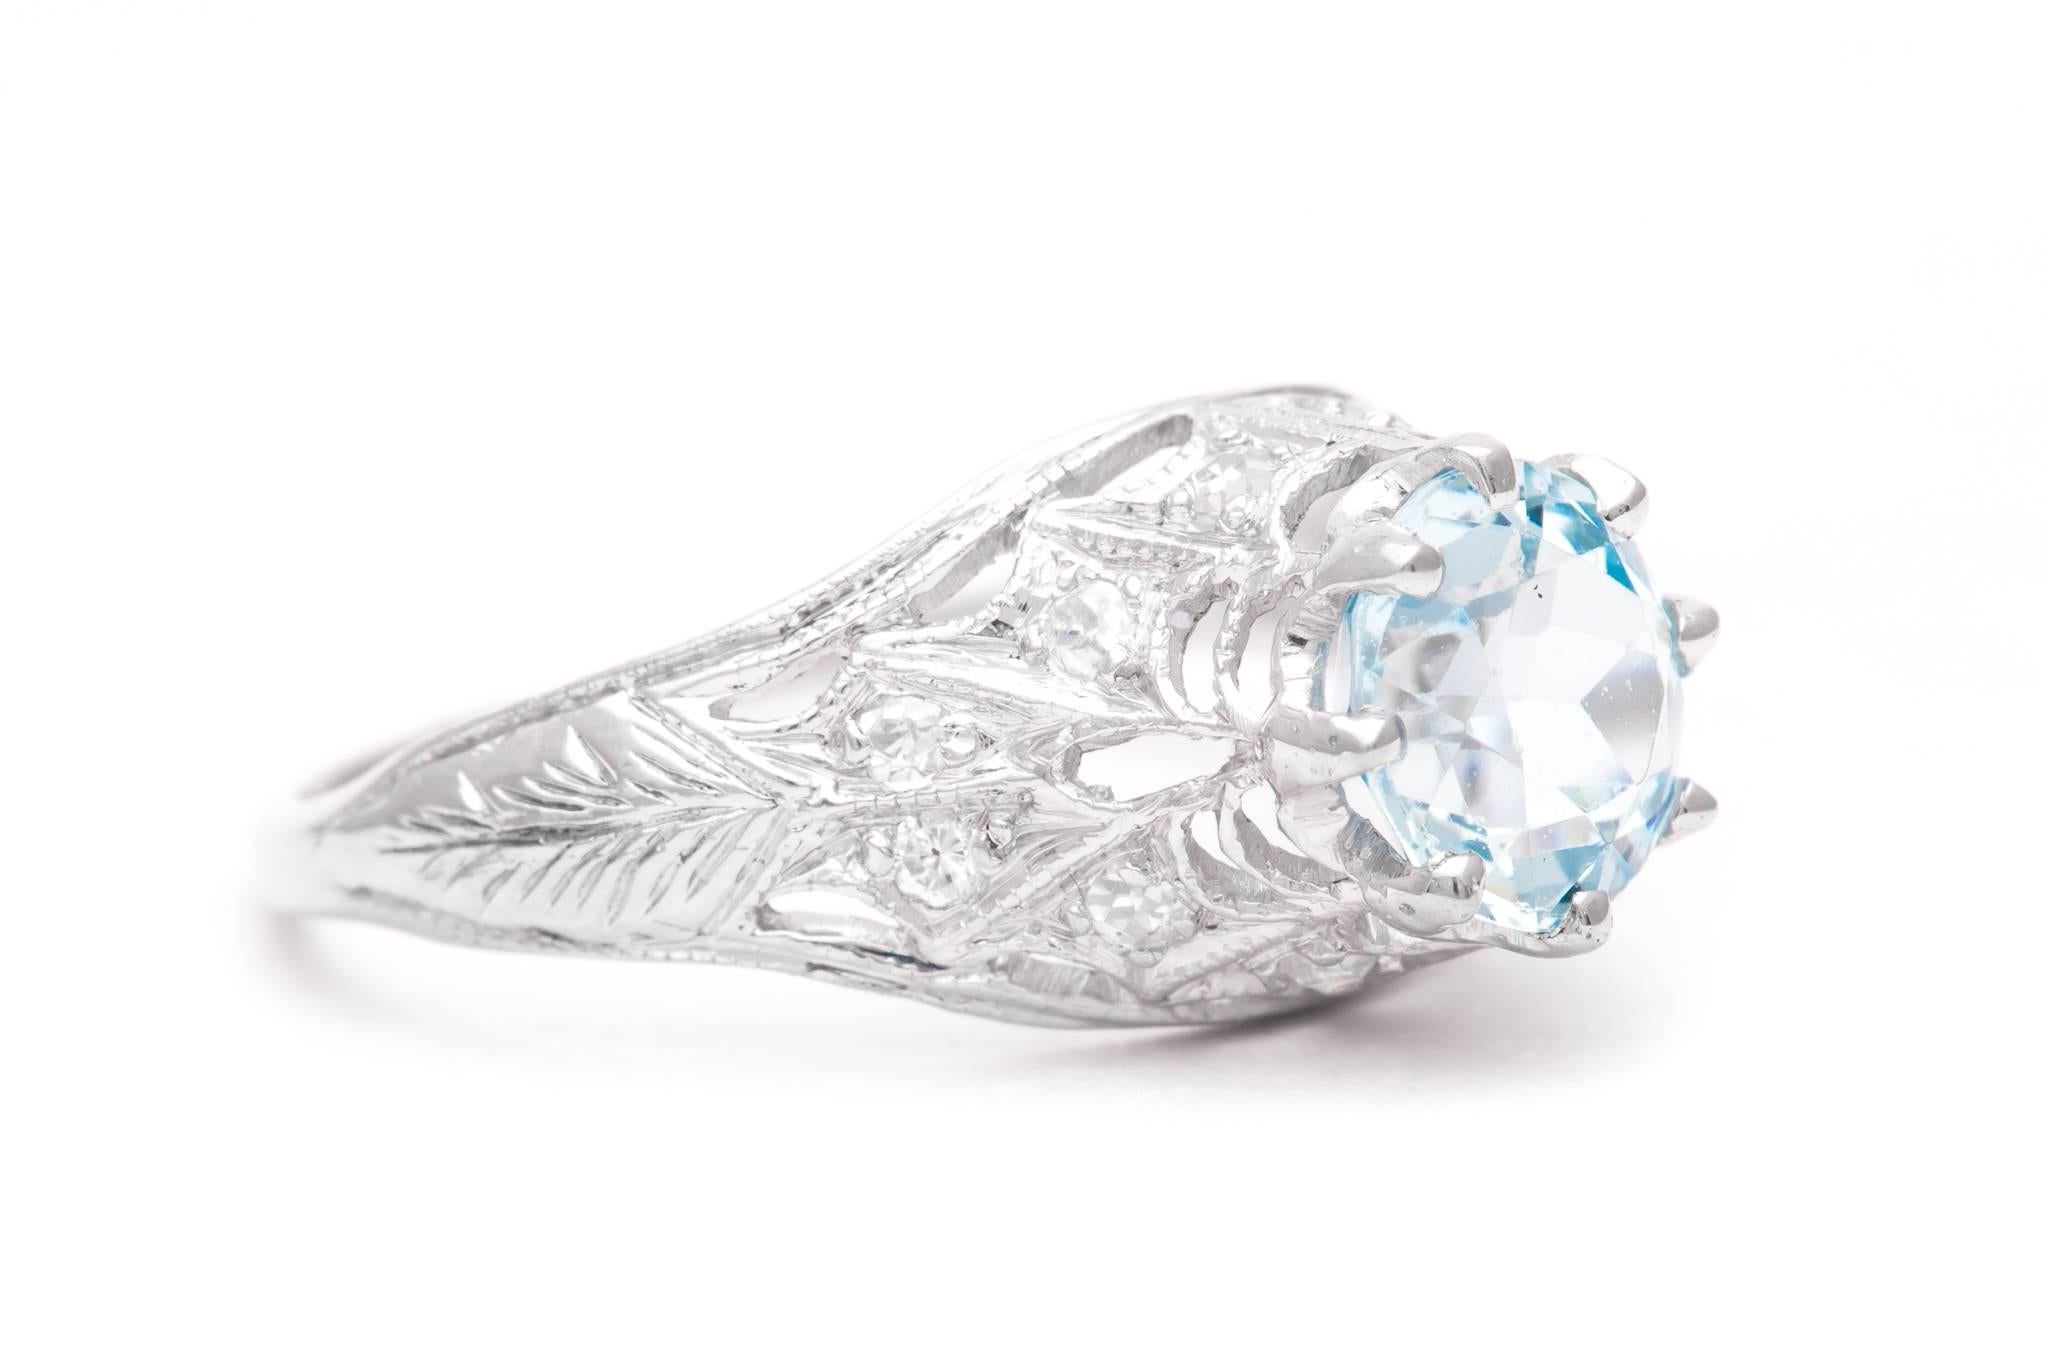 A beautiful hand crafted art deco period aquamarine and diamond ring in luxurious platinum.  Centered by a sparkling antique European cut aquamarine weighing 1 carat, this ring features pave set accenting diamonds throughout the mounting.

Set